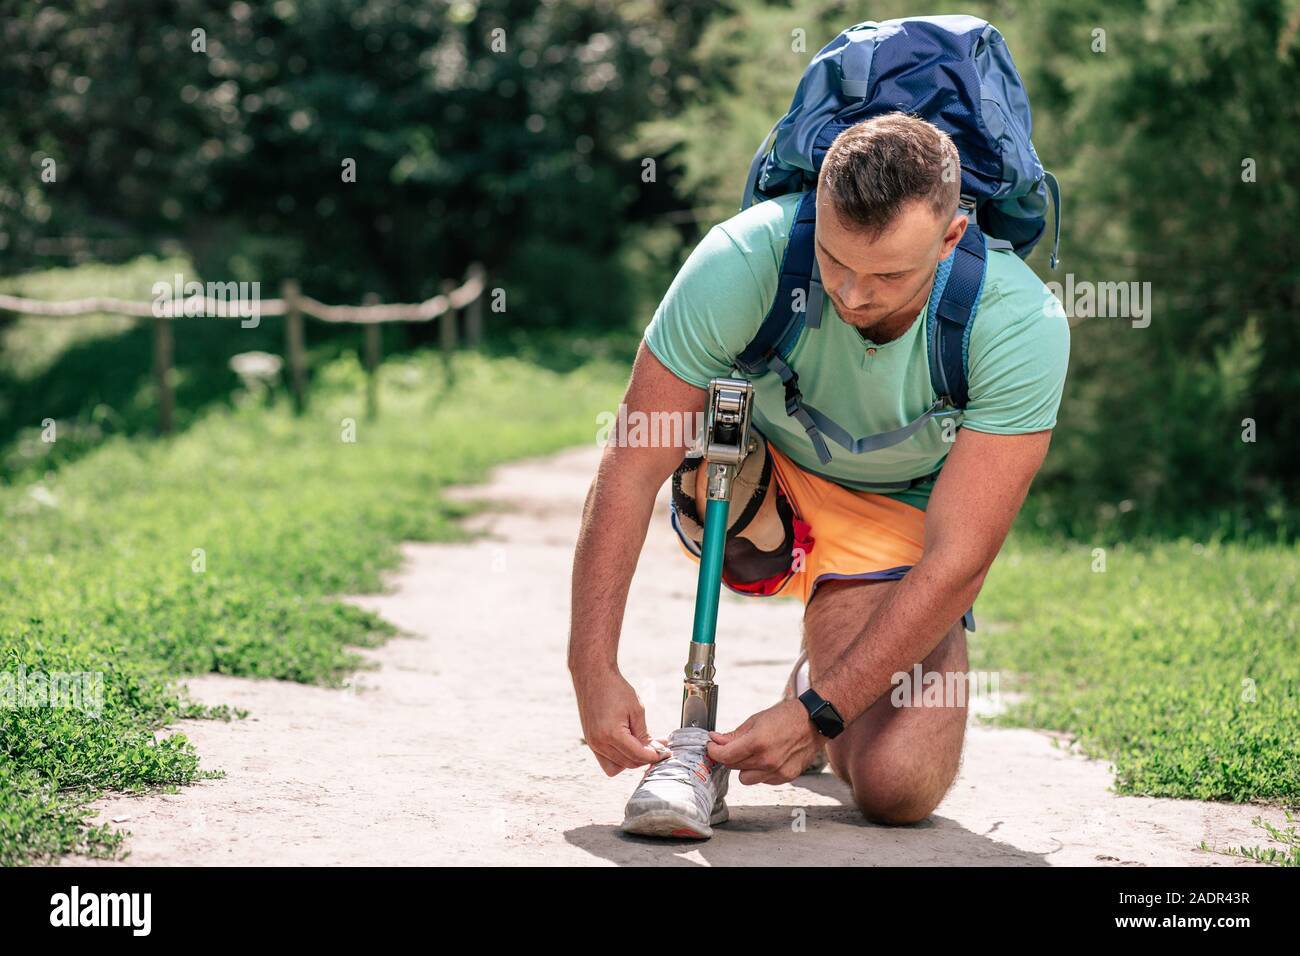 Active young man with prosthesis enjoying activities outdoors Stock Photo